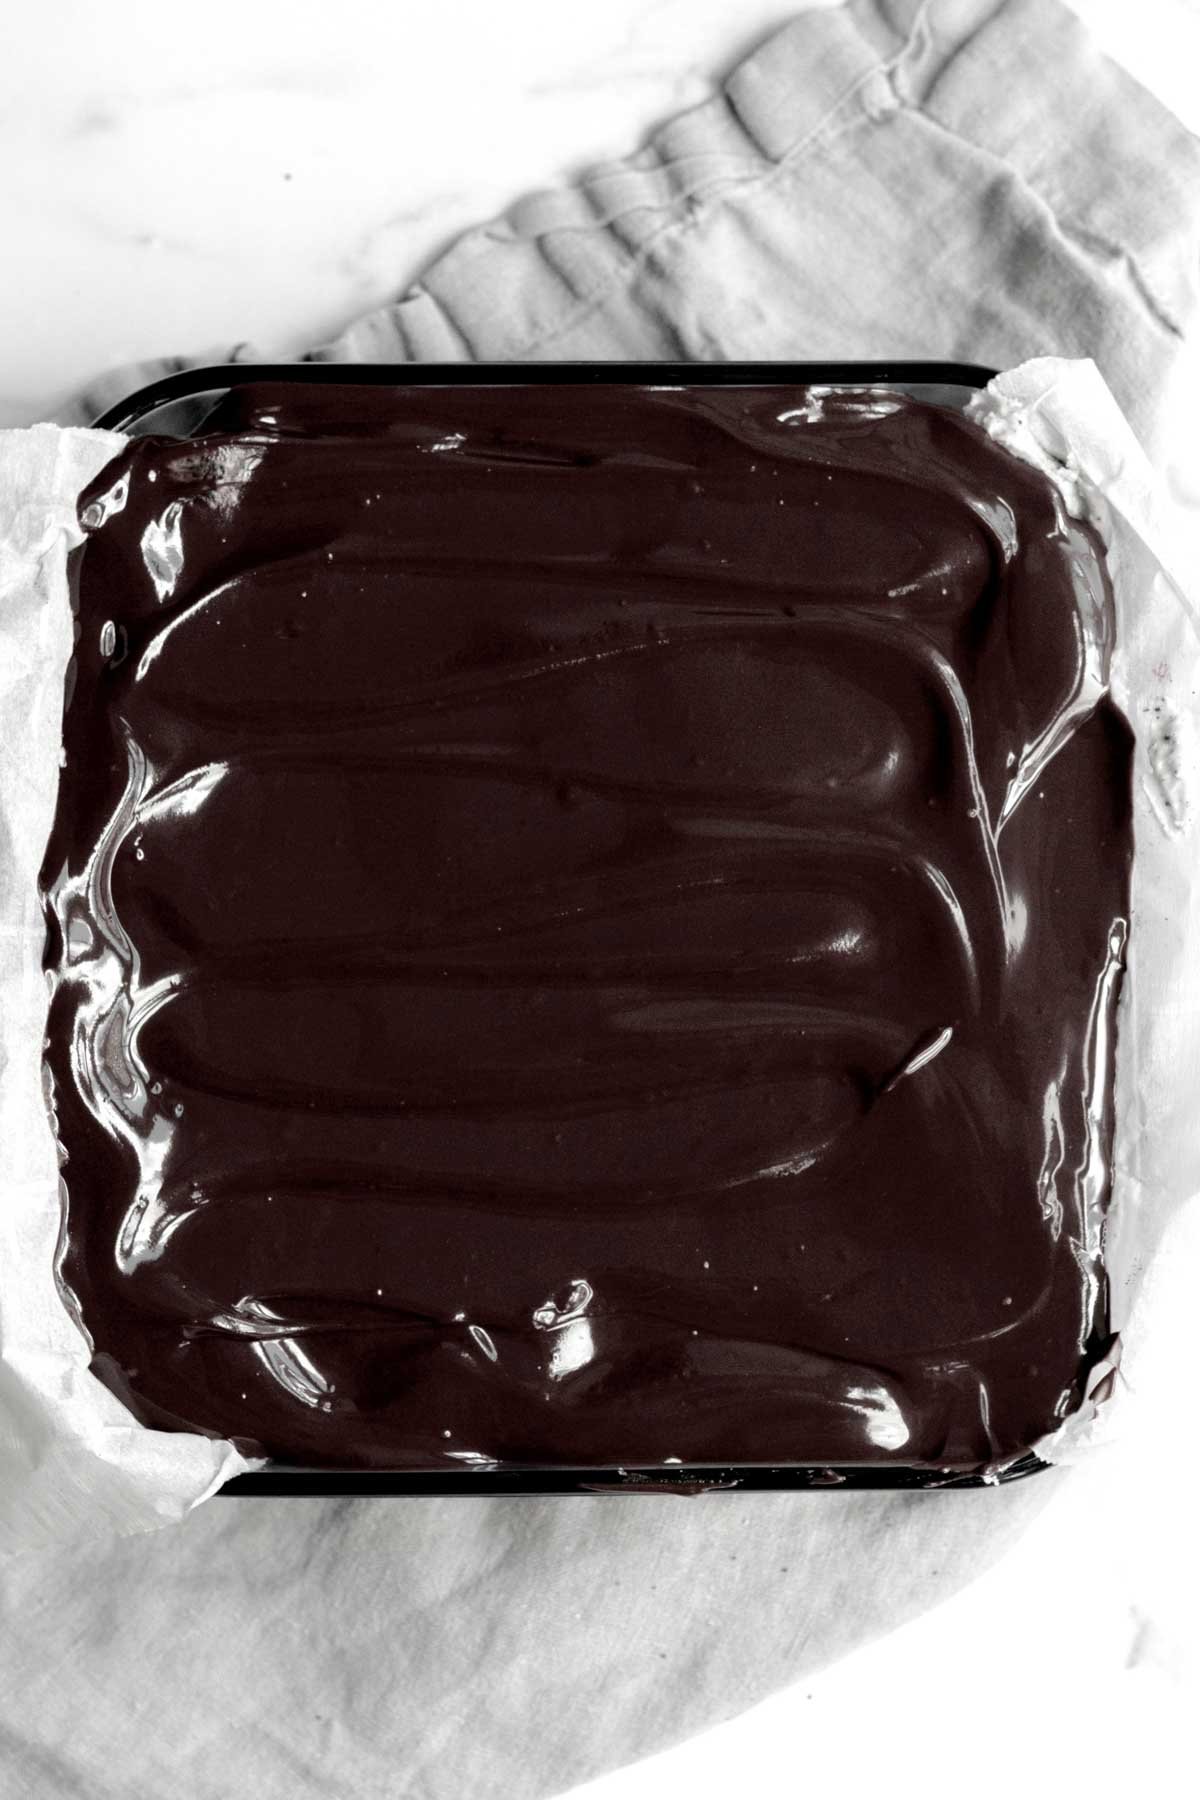 The chocolate ganache is spread evenly and smooth on top.